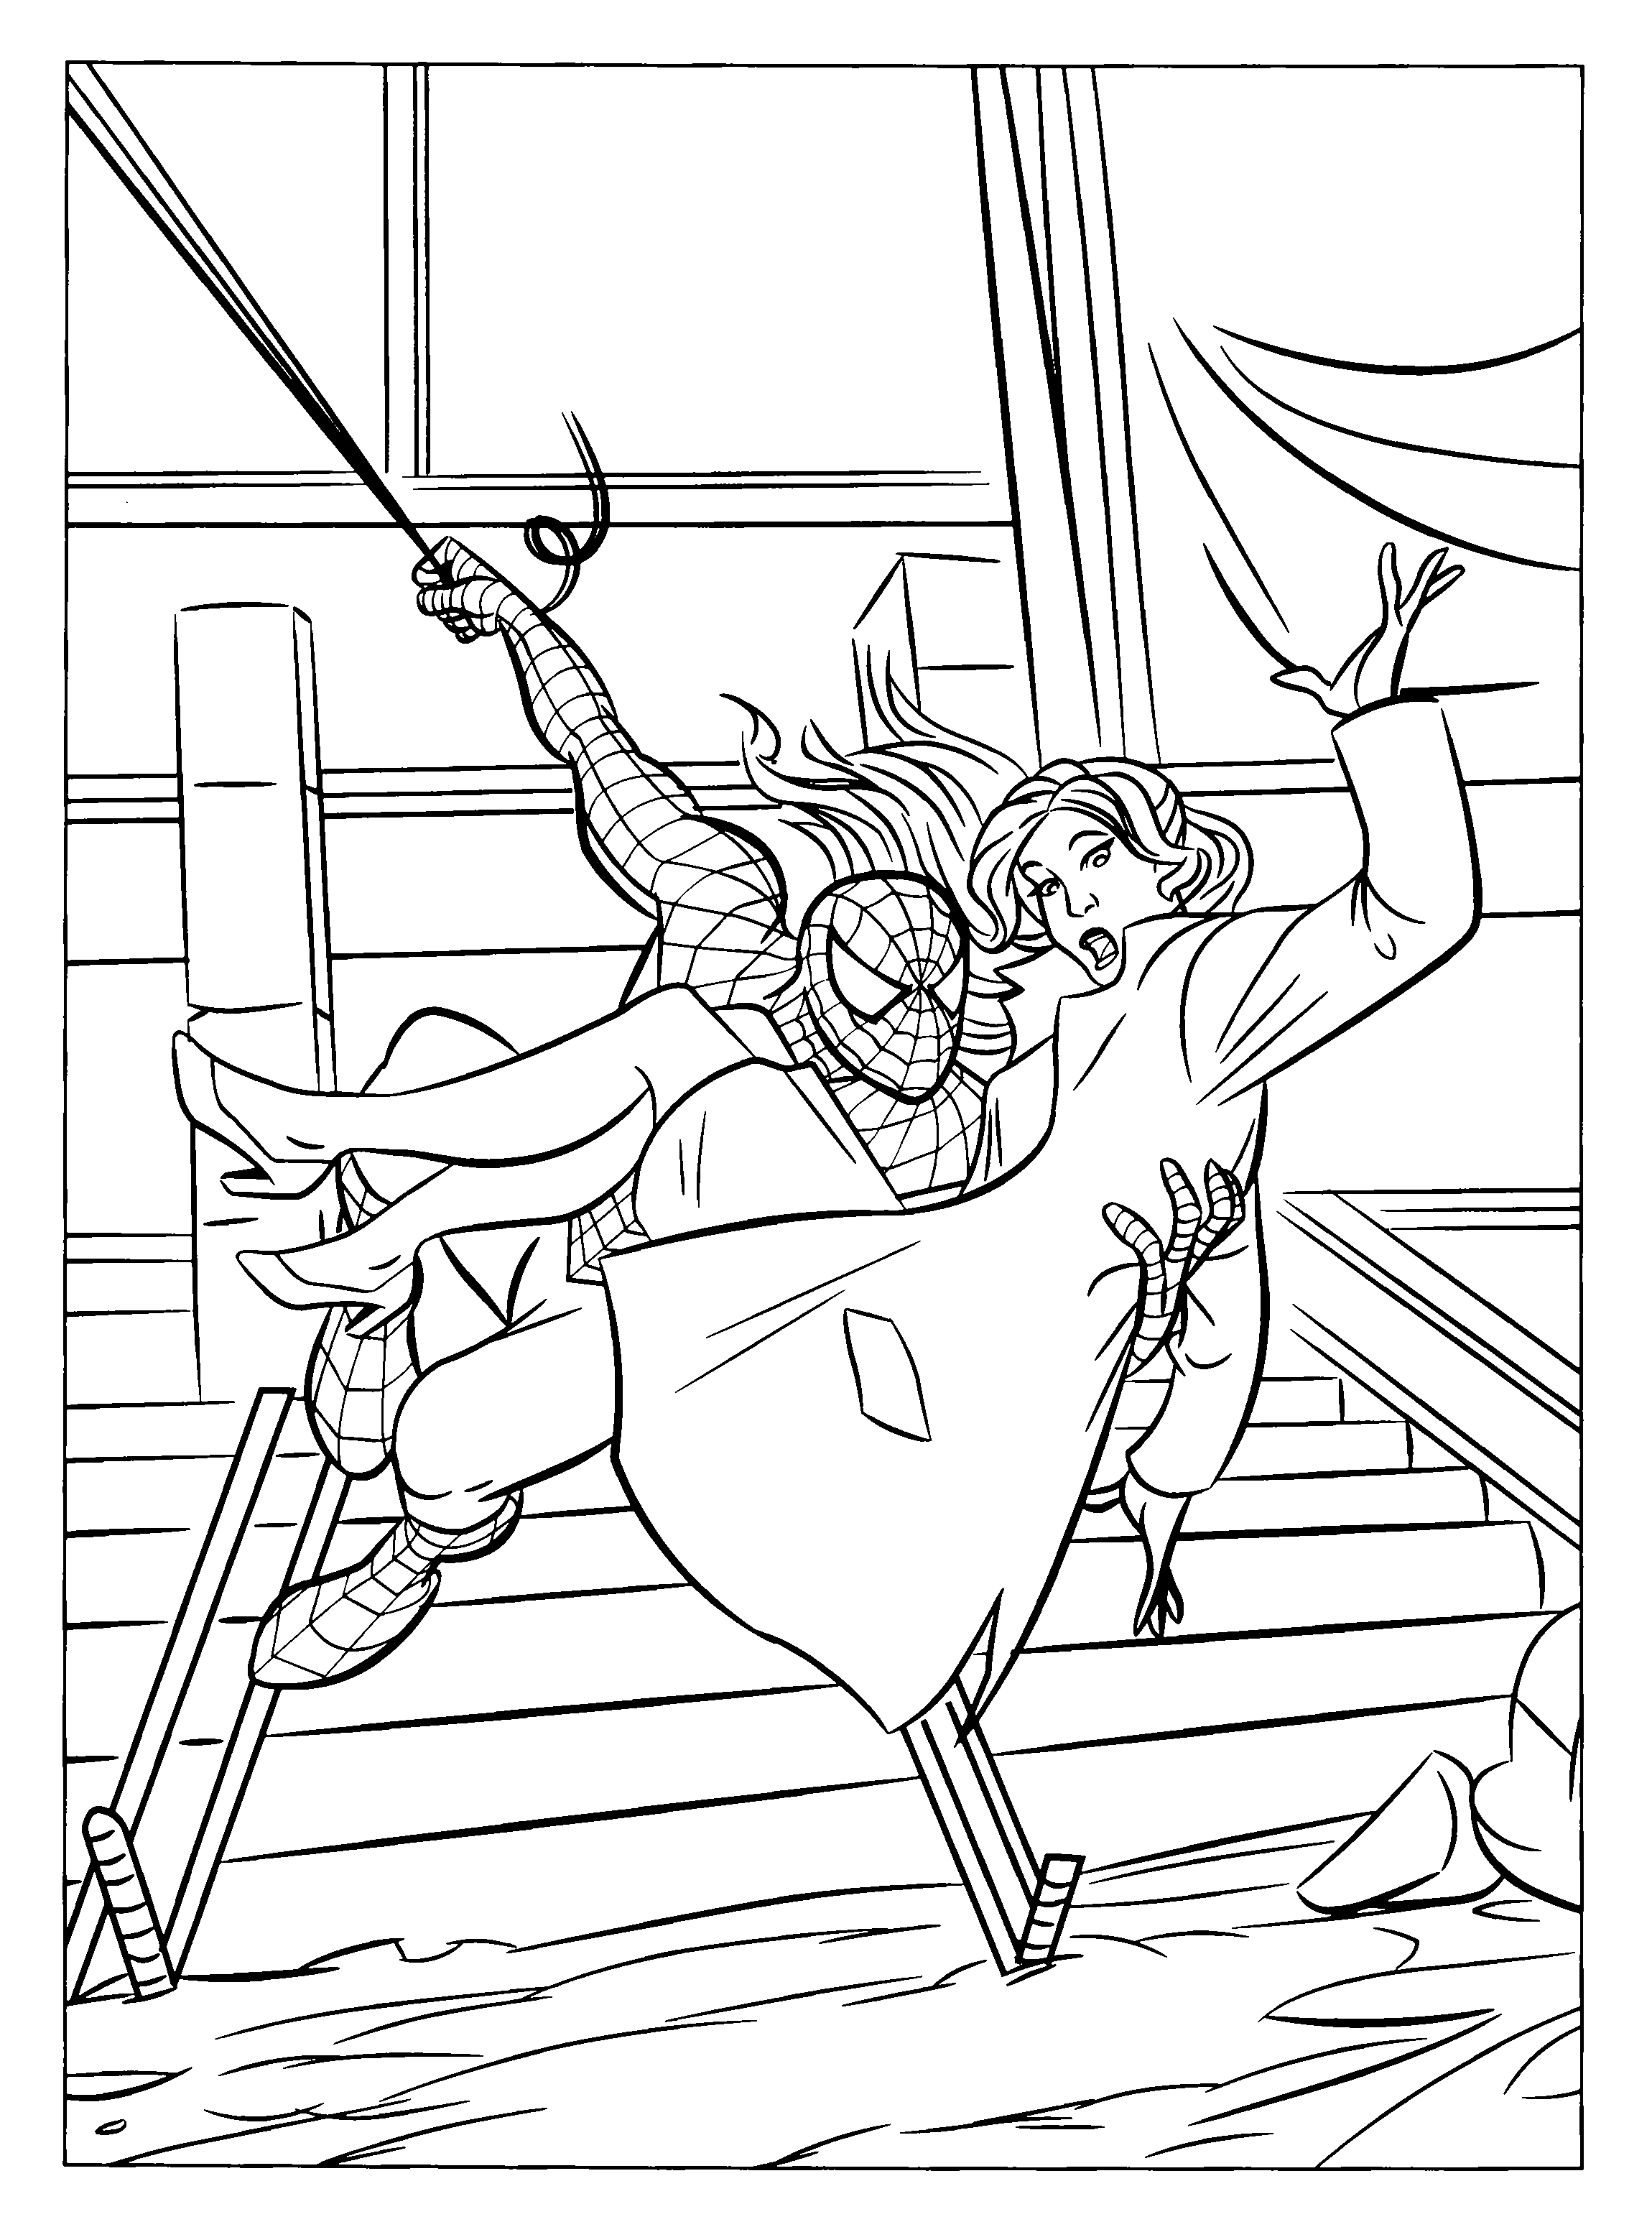 amazing spider man coloring pages the amazing spider man action yumiko fujiwara pages man spider coloring amazing 